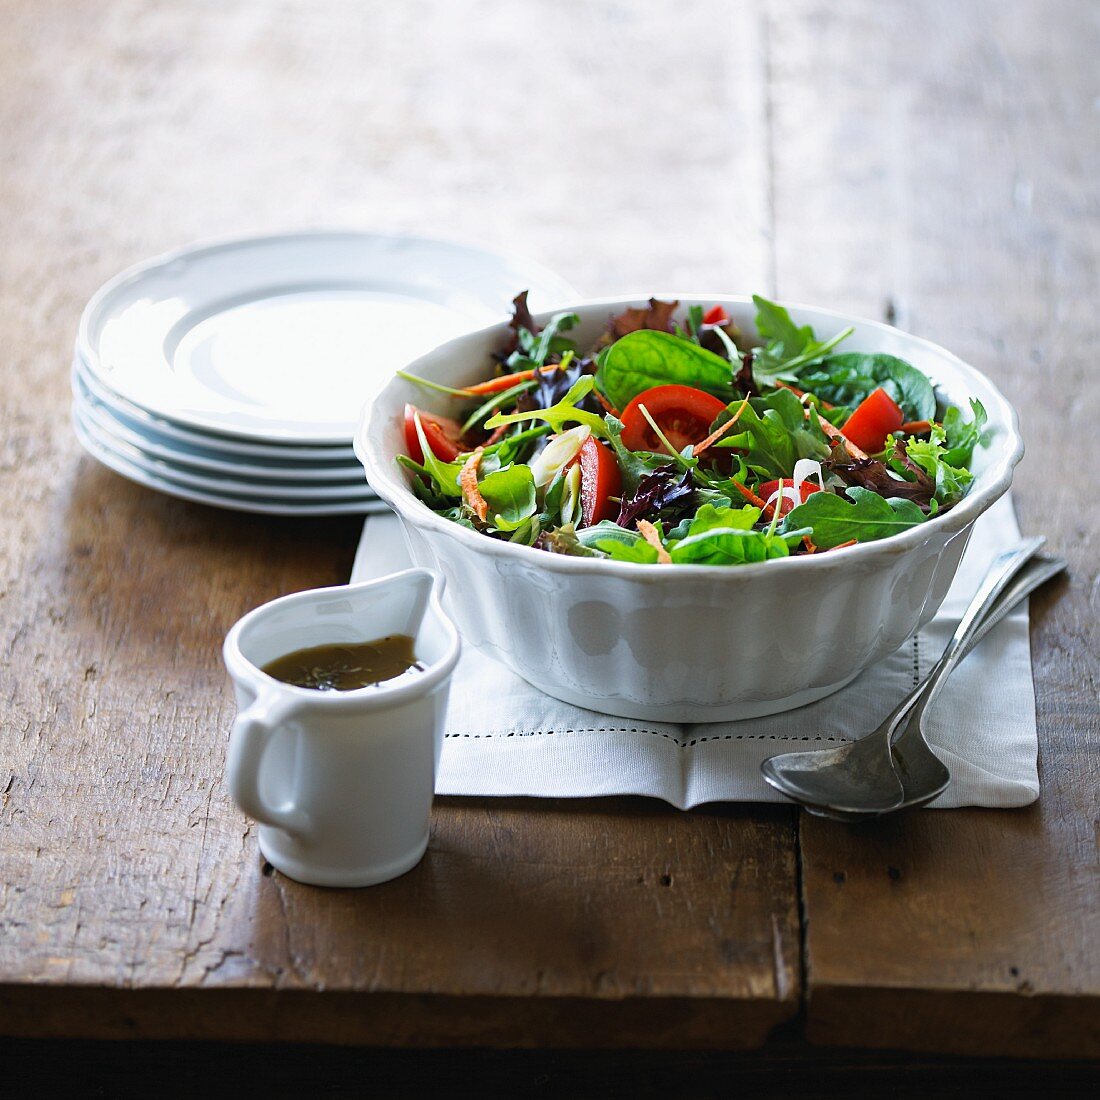 Green salad with tomatoes and a jug of vinaigrette